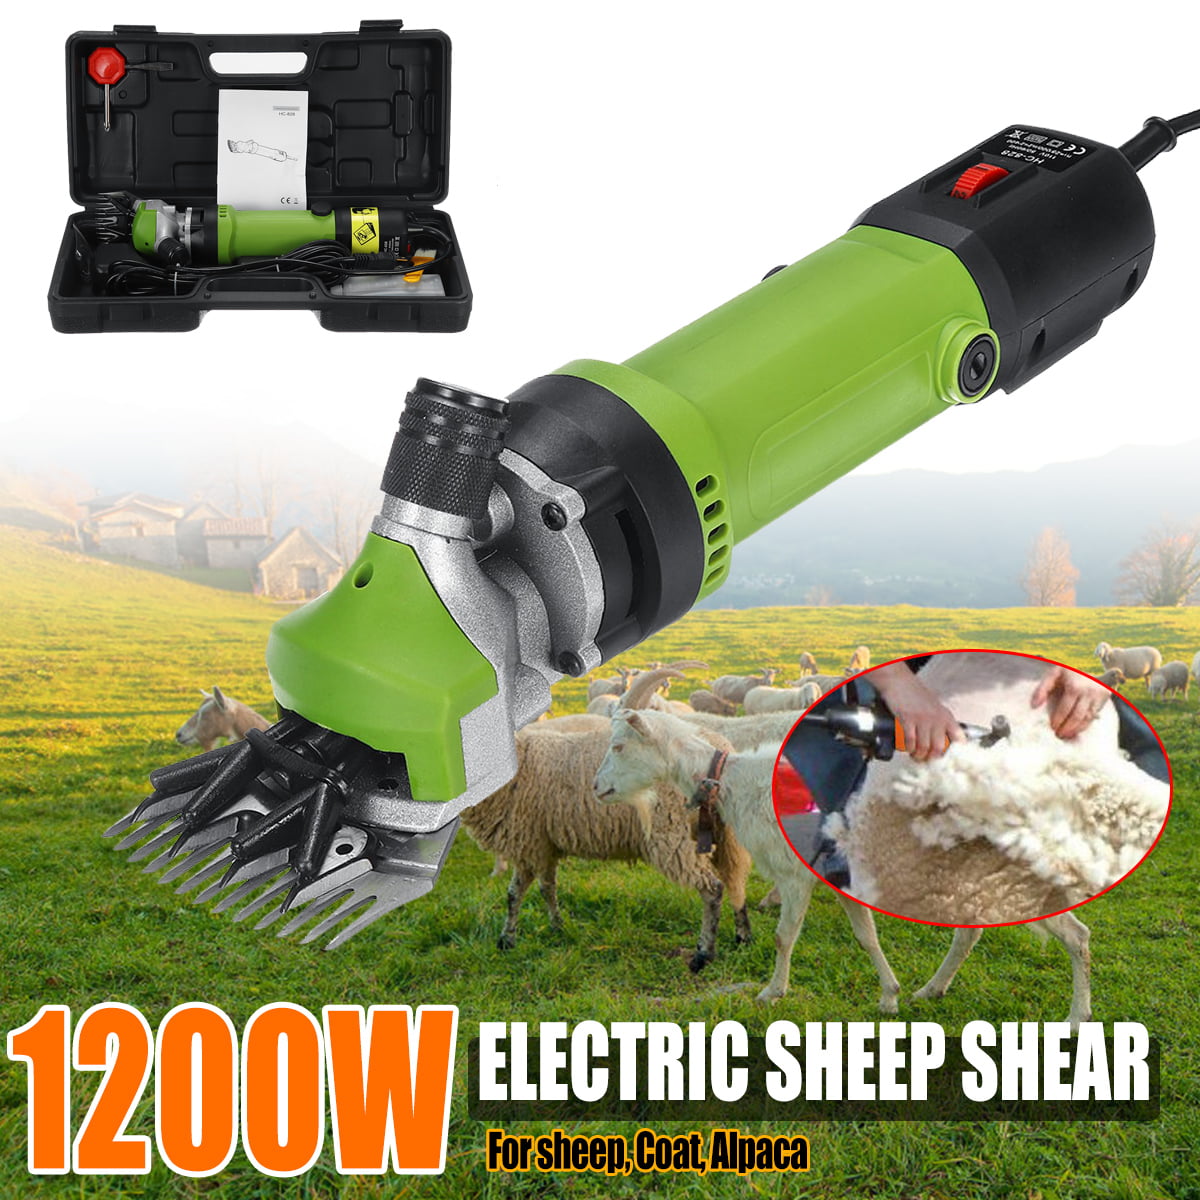 JEMPET Sheep/Horse Shears Farm Livestock Pet Supplies Sheep/Horse Clippers Electric Goat Shears Portable Electric Hair Fur Grooming Clippers for Horse Goats Alpacas Llamas Thick Coat Animals 